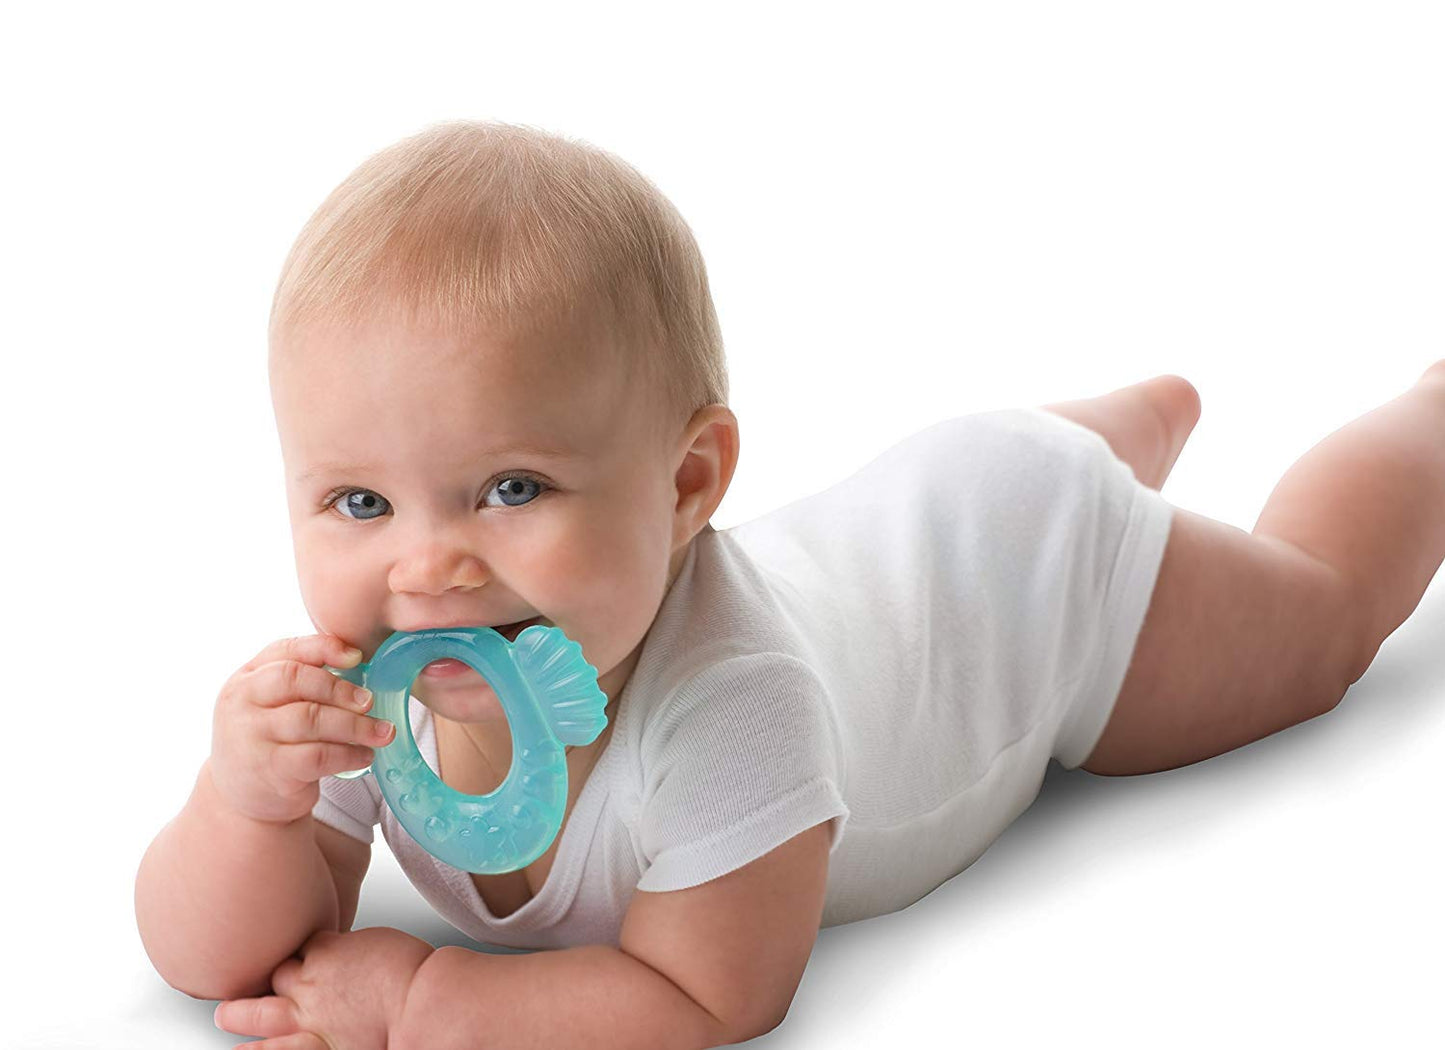 Nuby Silicone Teethe-EEZ Teether with Bristles, Includes Hygienic Case